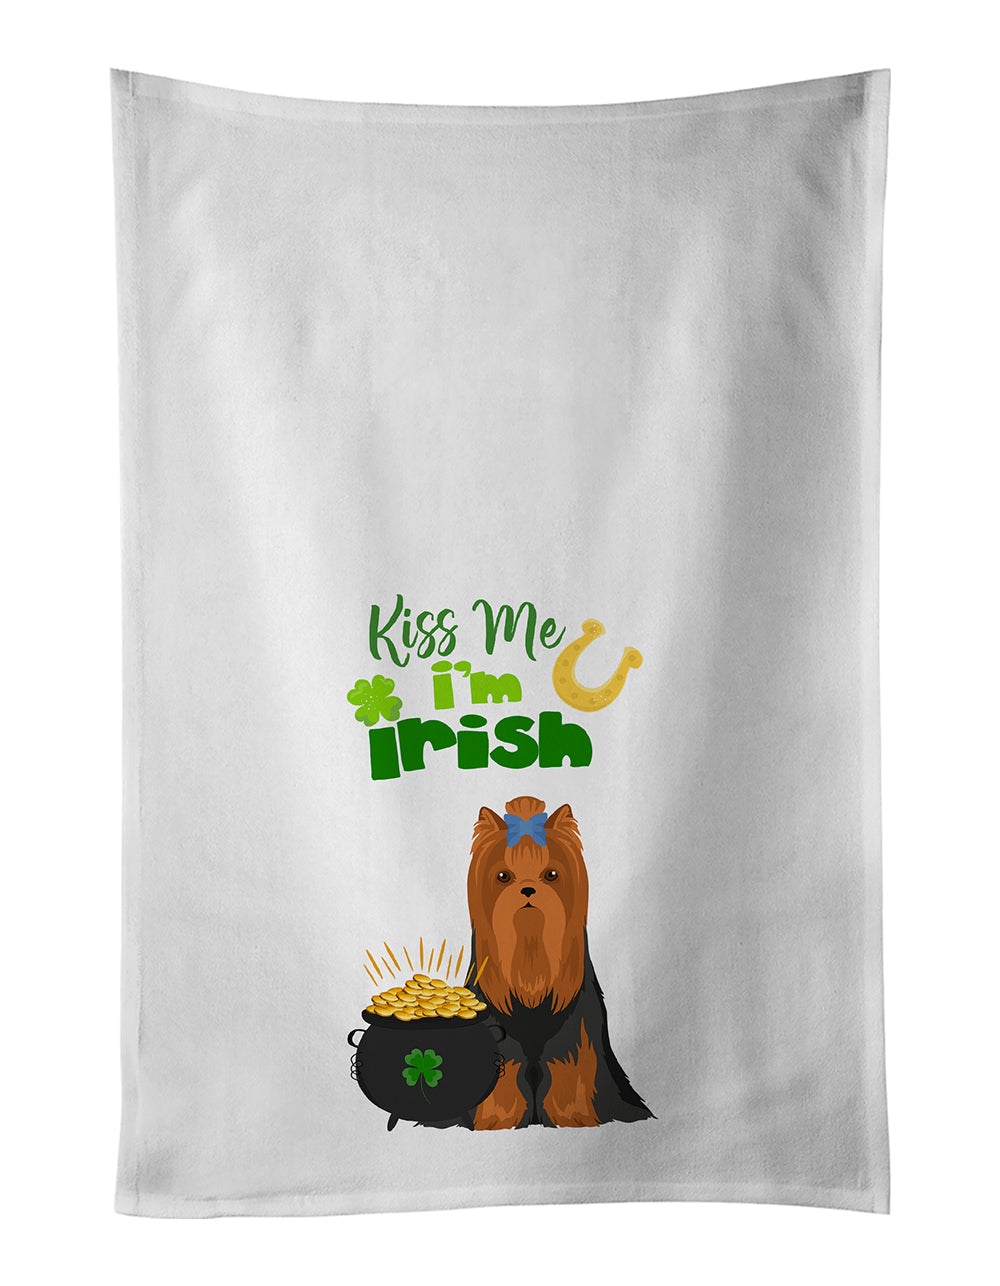 Buy this Black and Tan Full Coat Yorkshire Terrier St. Patrick&#39;s Day White Kitchen Towel Set of 2 Dish Towels